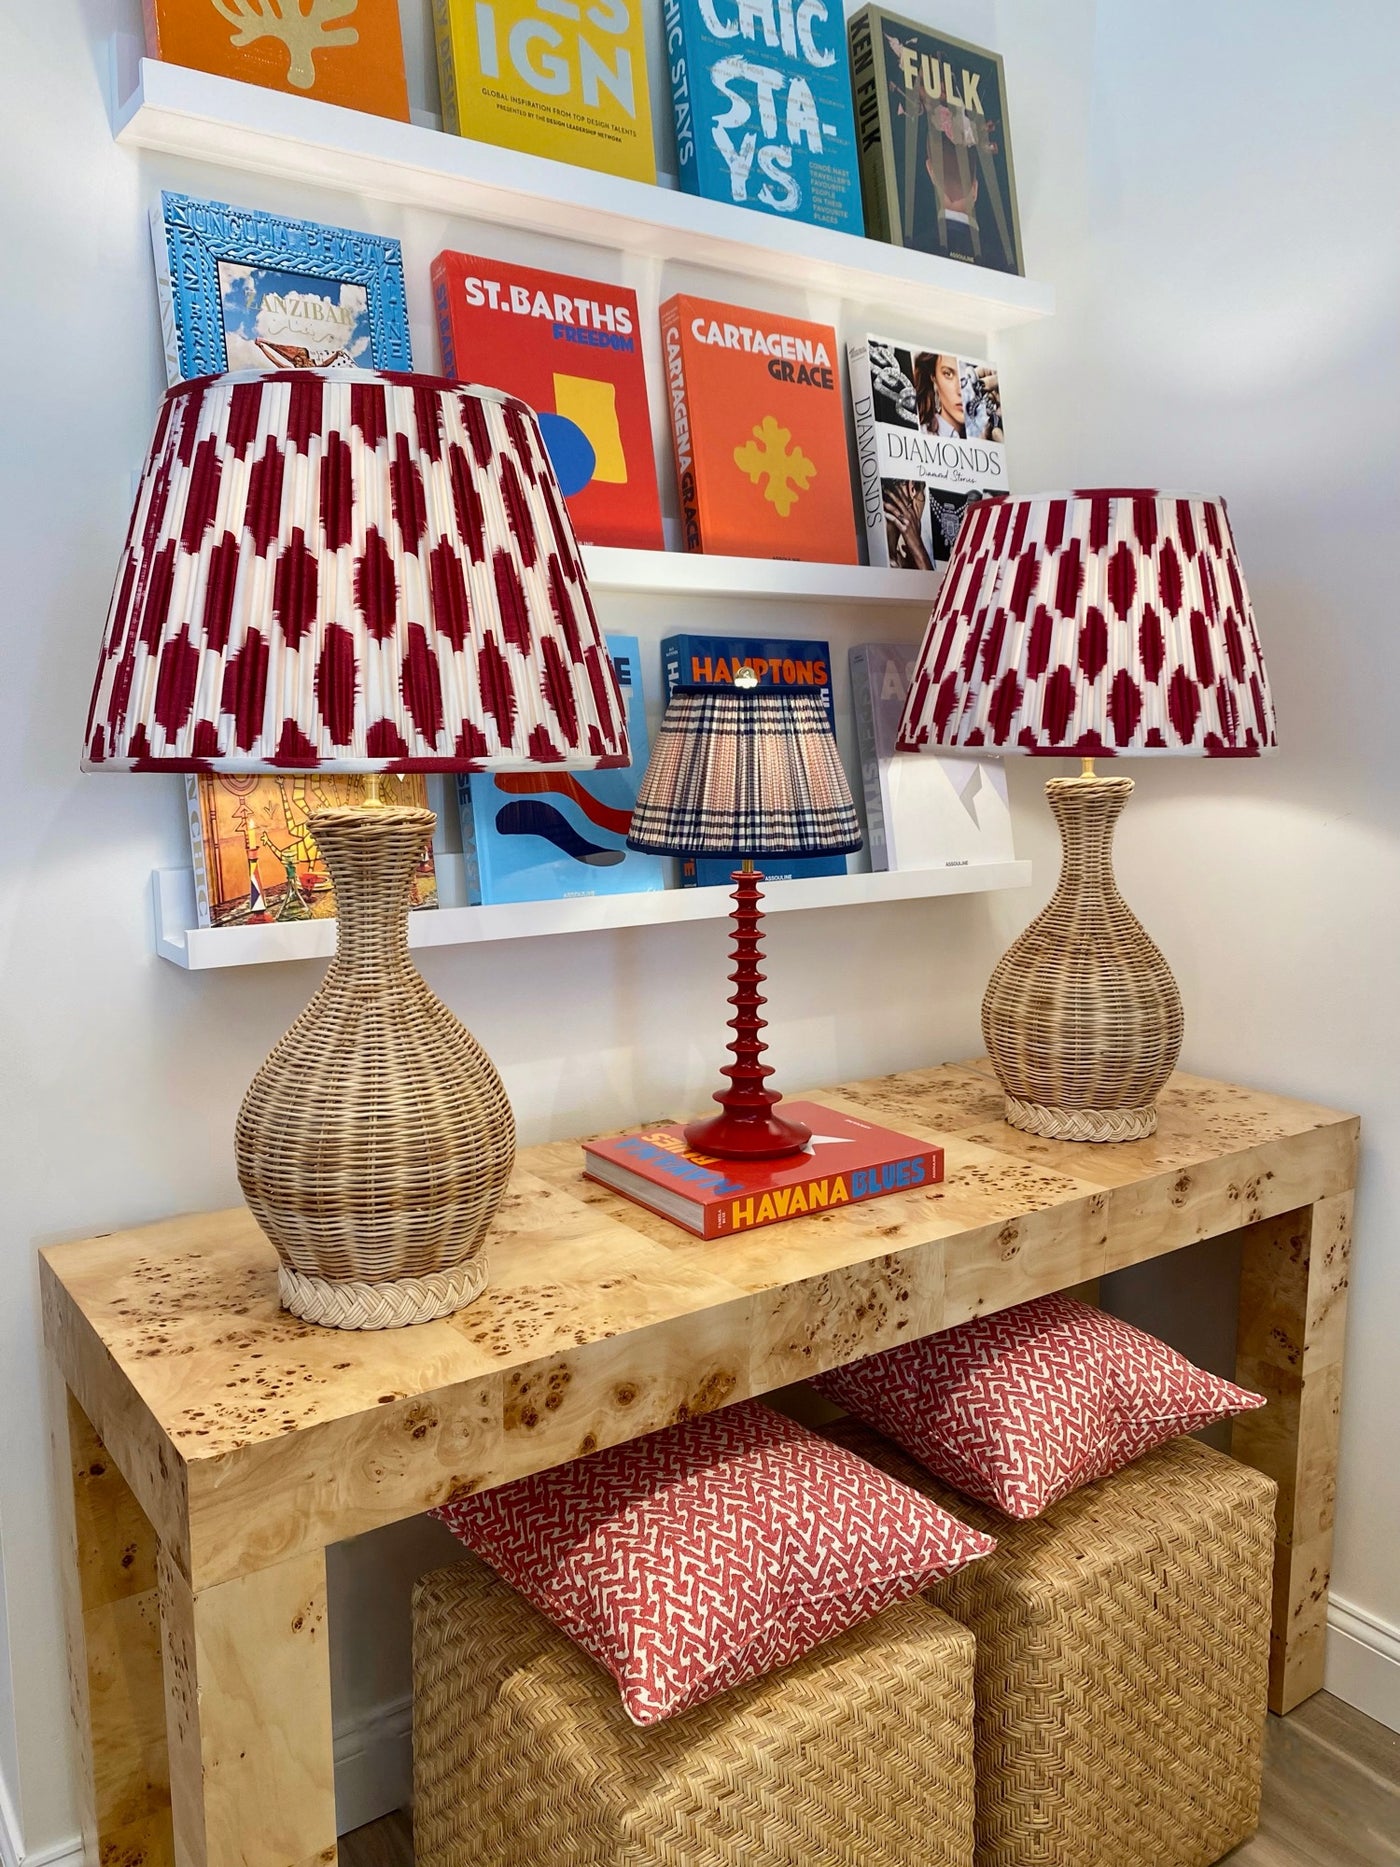 Red and white ikat lampshades on rattan lamps